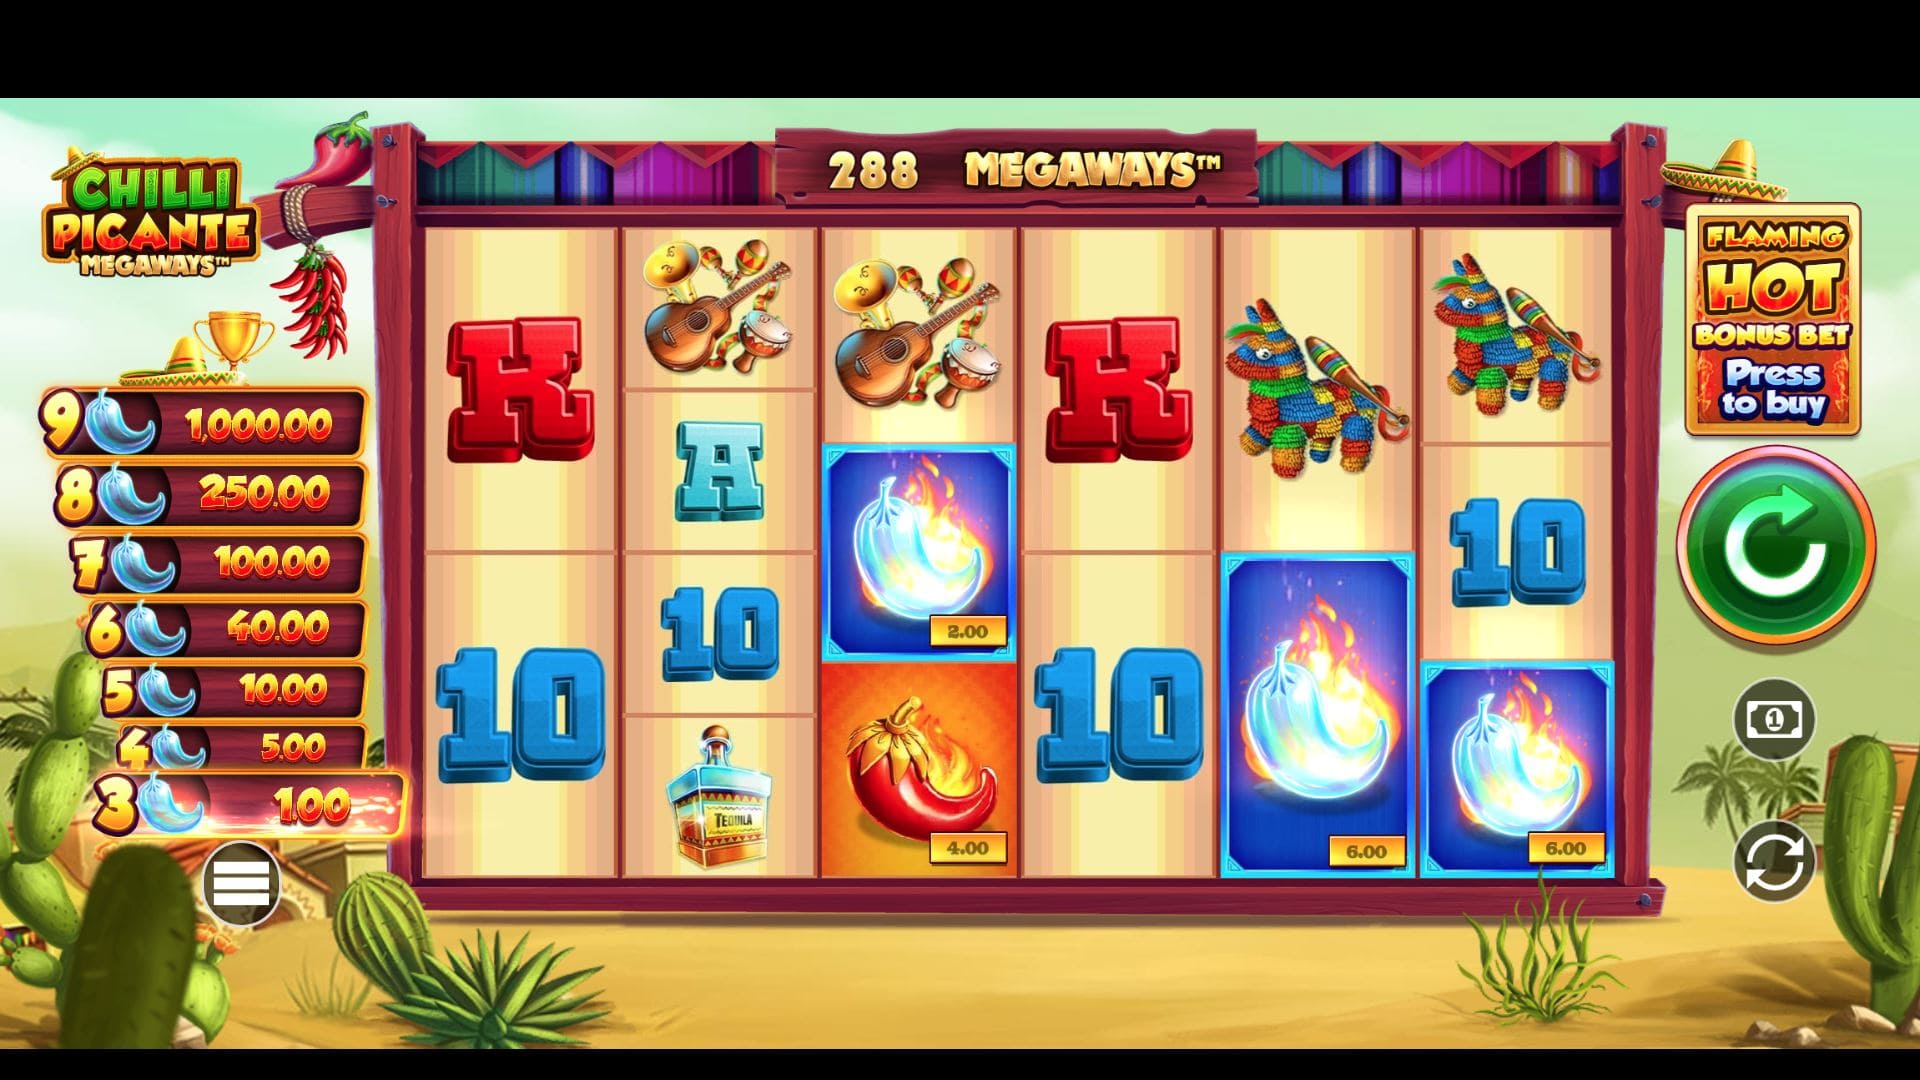 Chilli Picante Megaways Free Spins